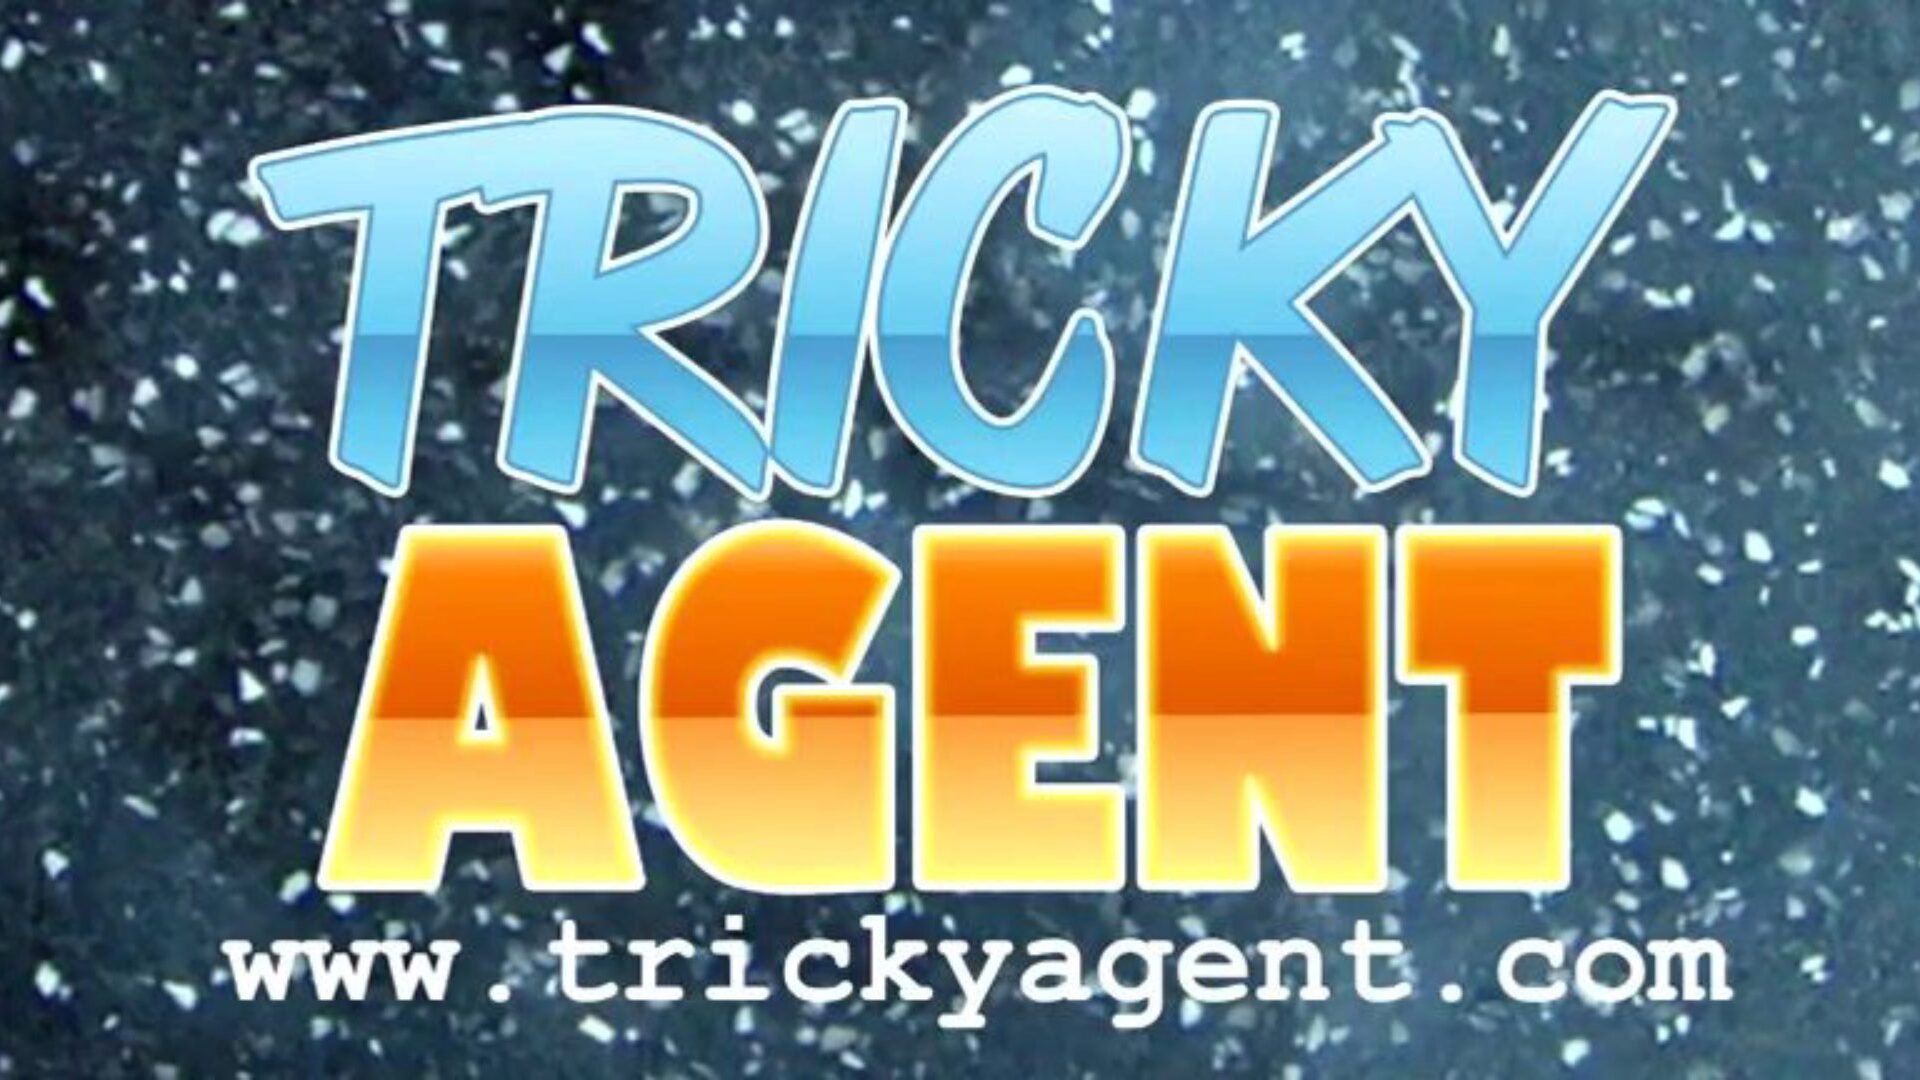 Tricky Agent - Welcoming Foxy to adult filmmaking